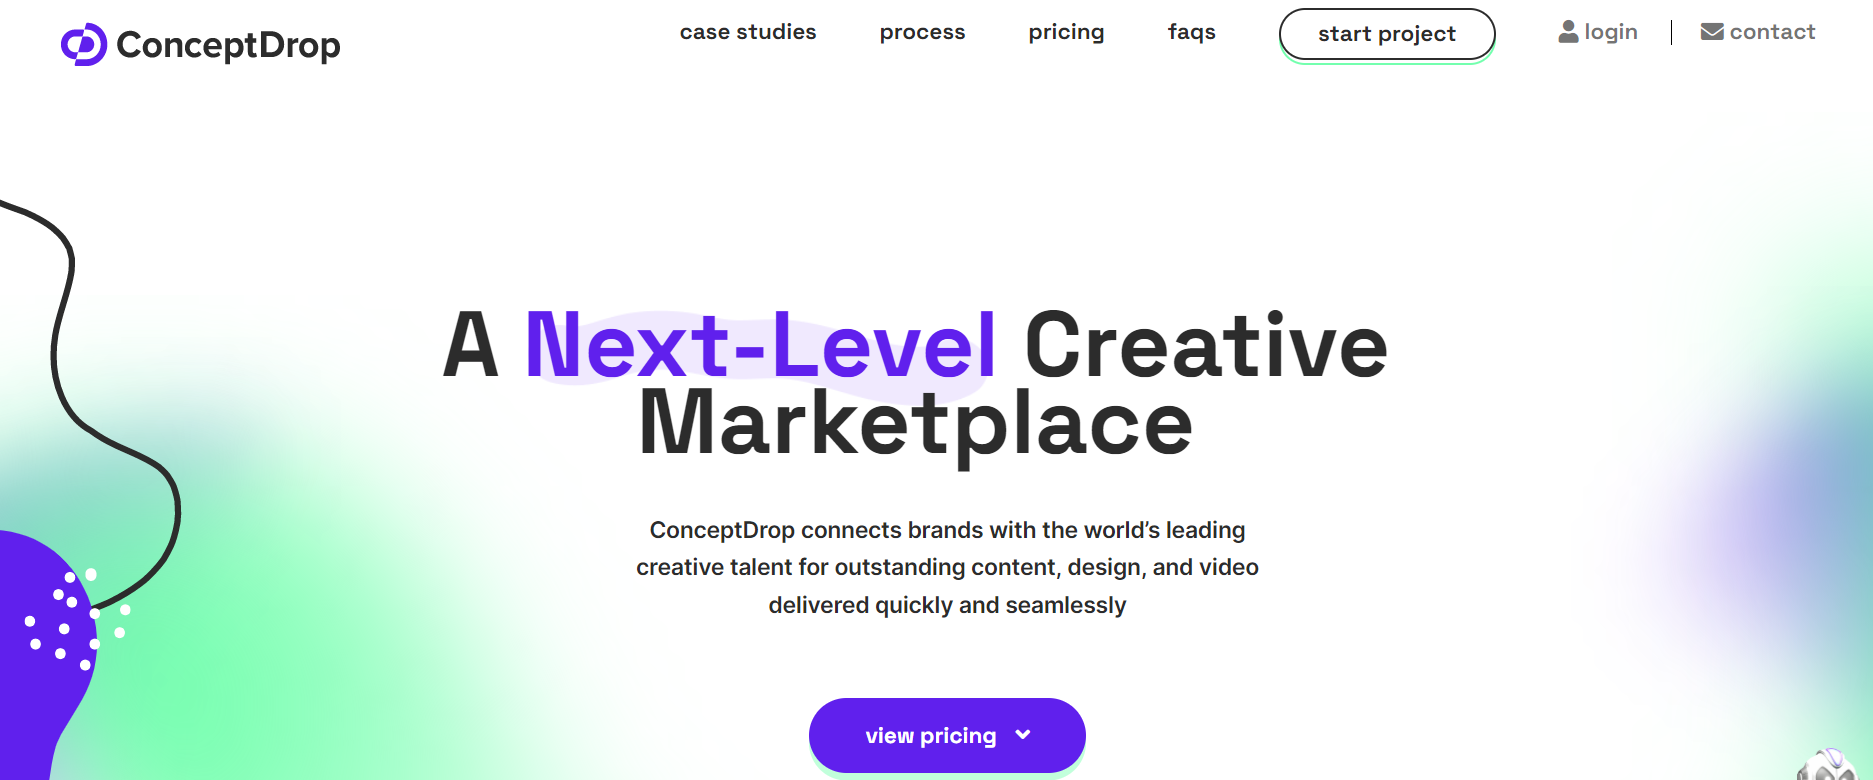 ConceptDrop AI service for hiring designers